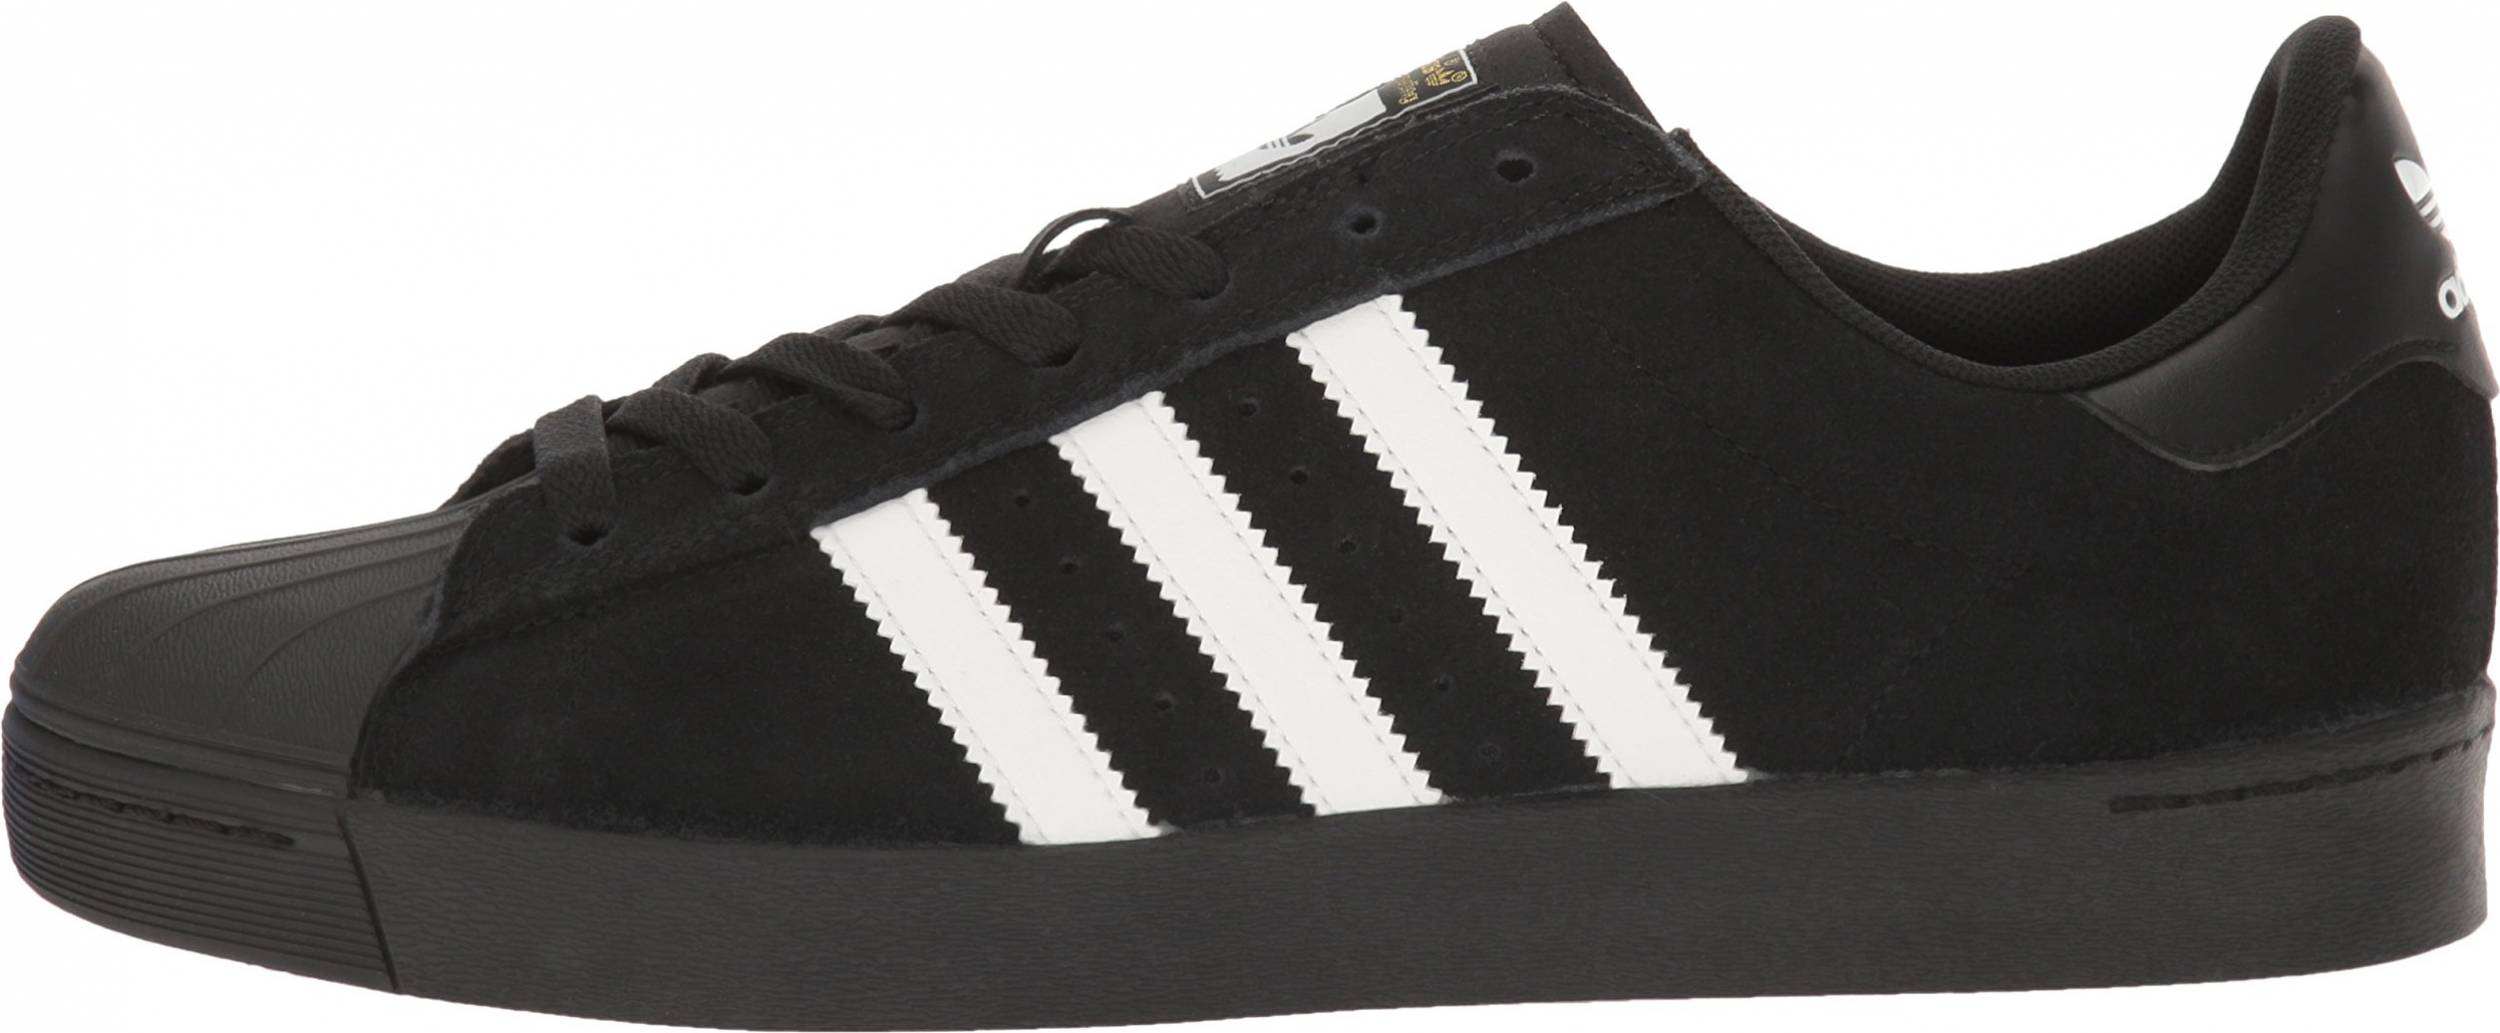 Adidas Superstar Vulc Online Hotsell, UP TO 53% OFF | www ... كونتيجو